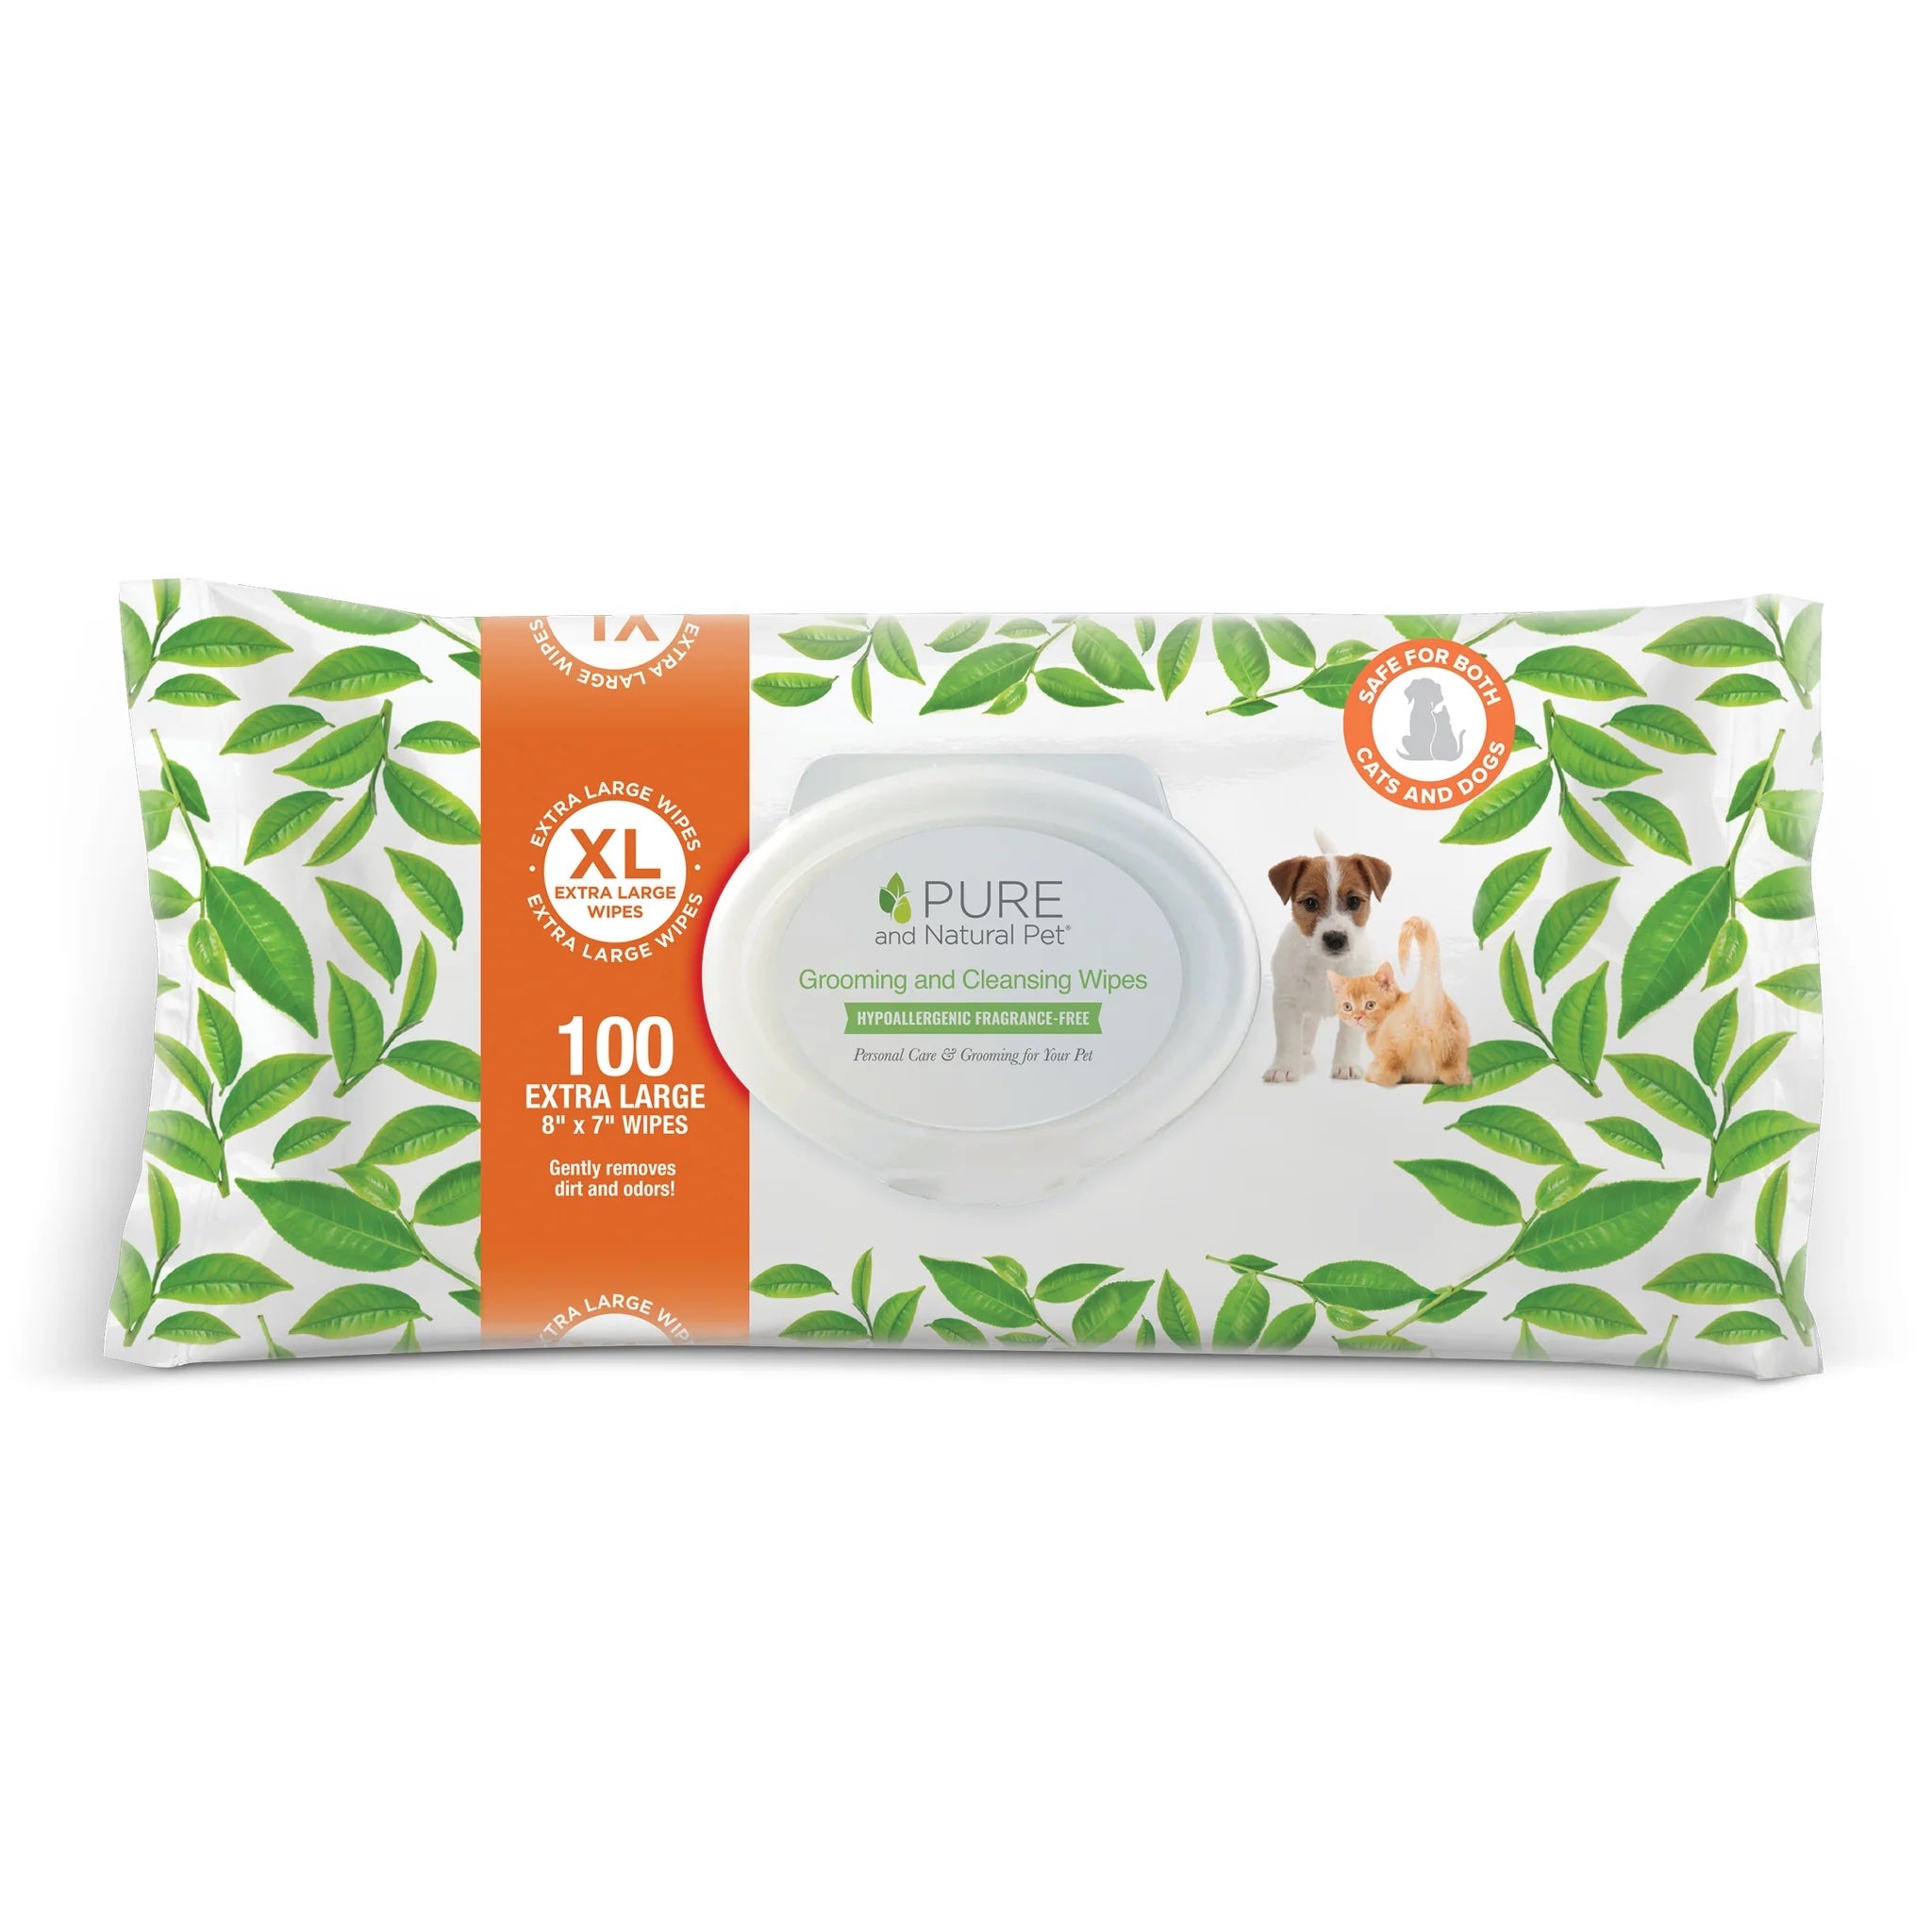 Pure and Natural Pet Grooming and Cleansing Wipes: Fragrance-Free